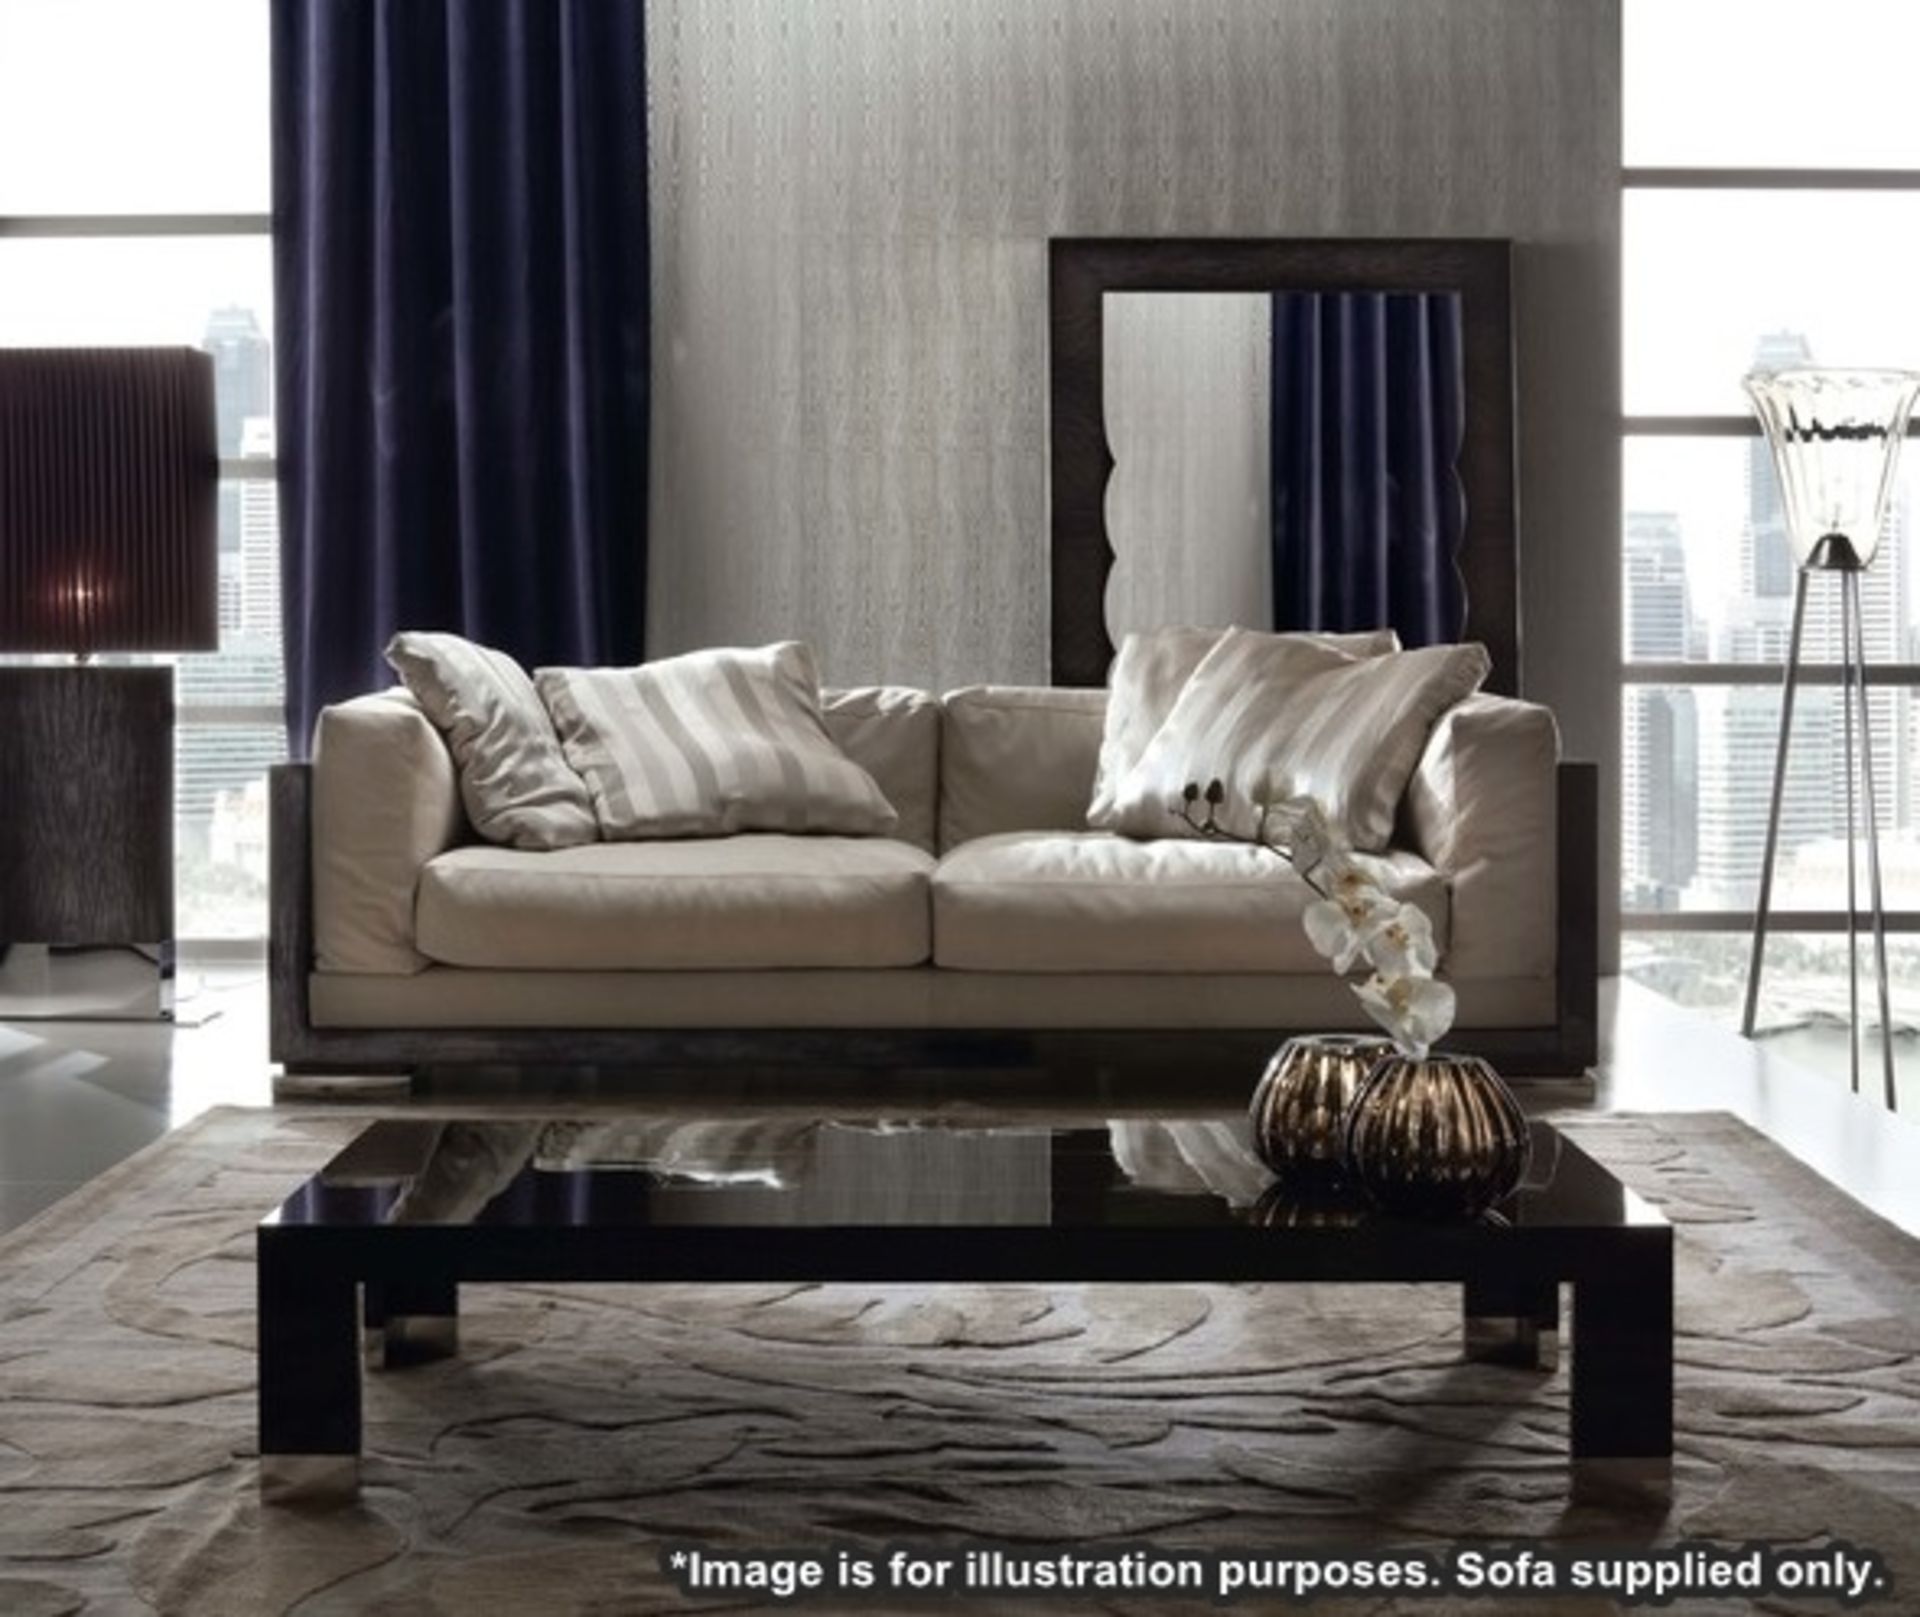 *Just Added!* 1 x GIORGIO "Absolute" 2-Seater Sofa (400/02/n) - Features A Stunning Laquered Frame - Image 3 of 11